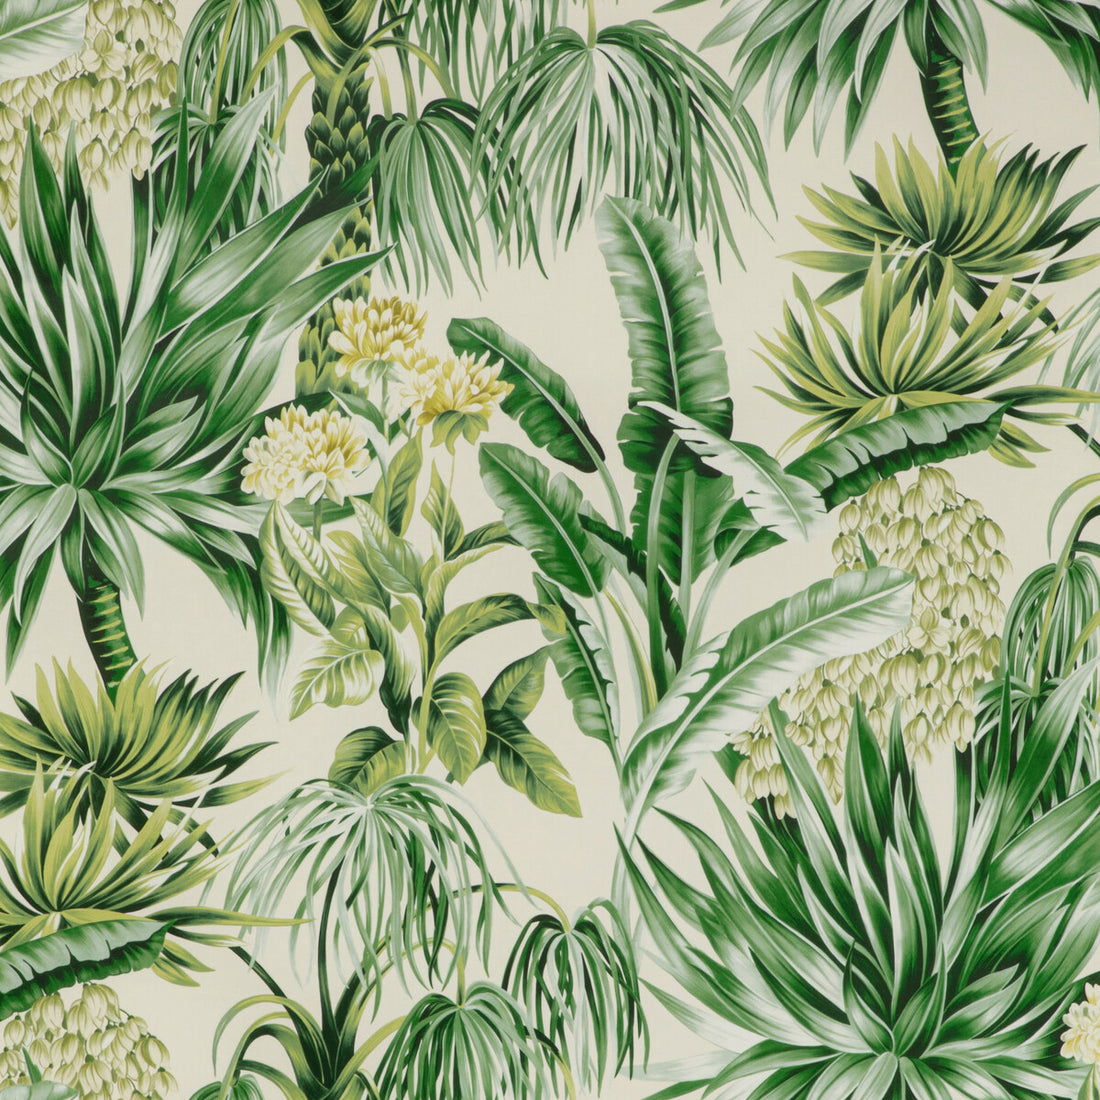 Caluya Print fabric in palm color - pattern 2020196.3034.0 - by Lee Jofa in the Mindoro collection